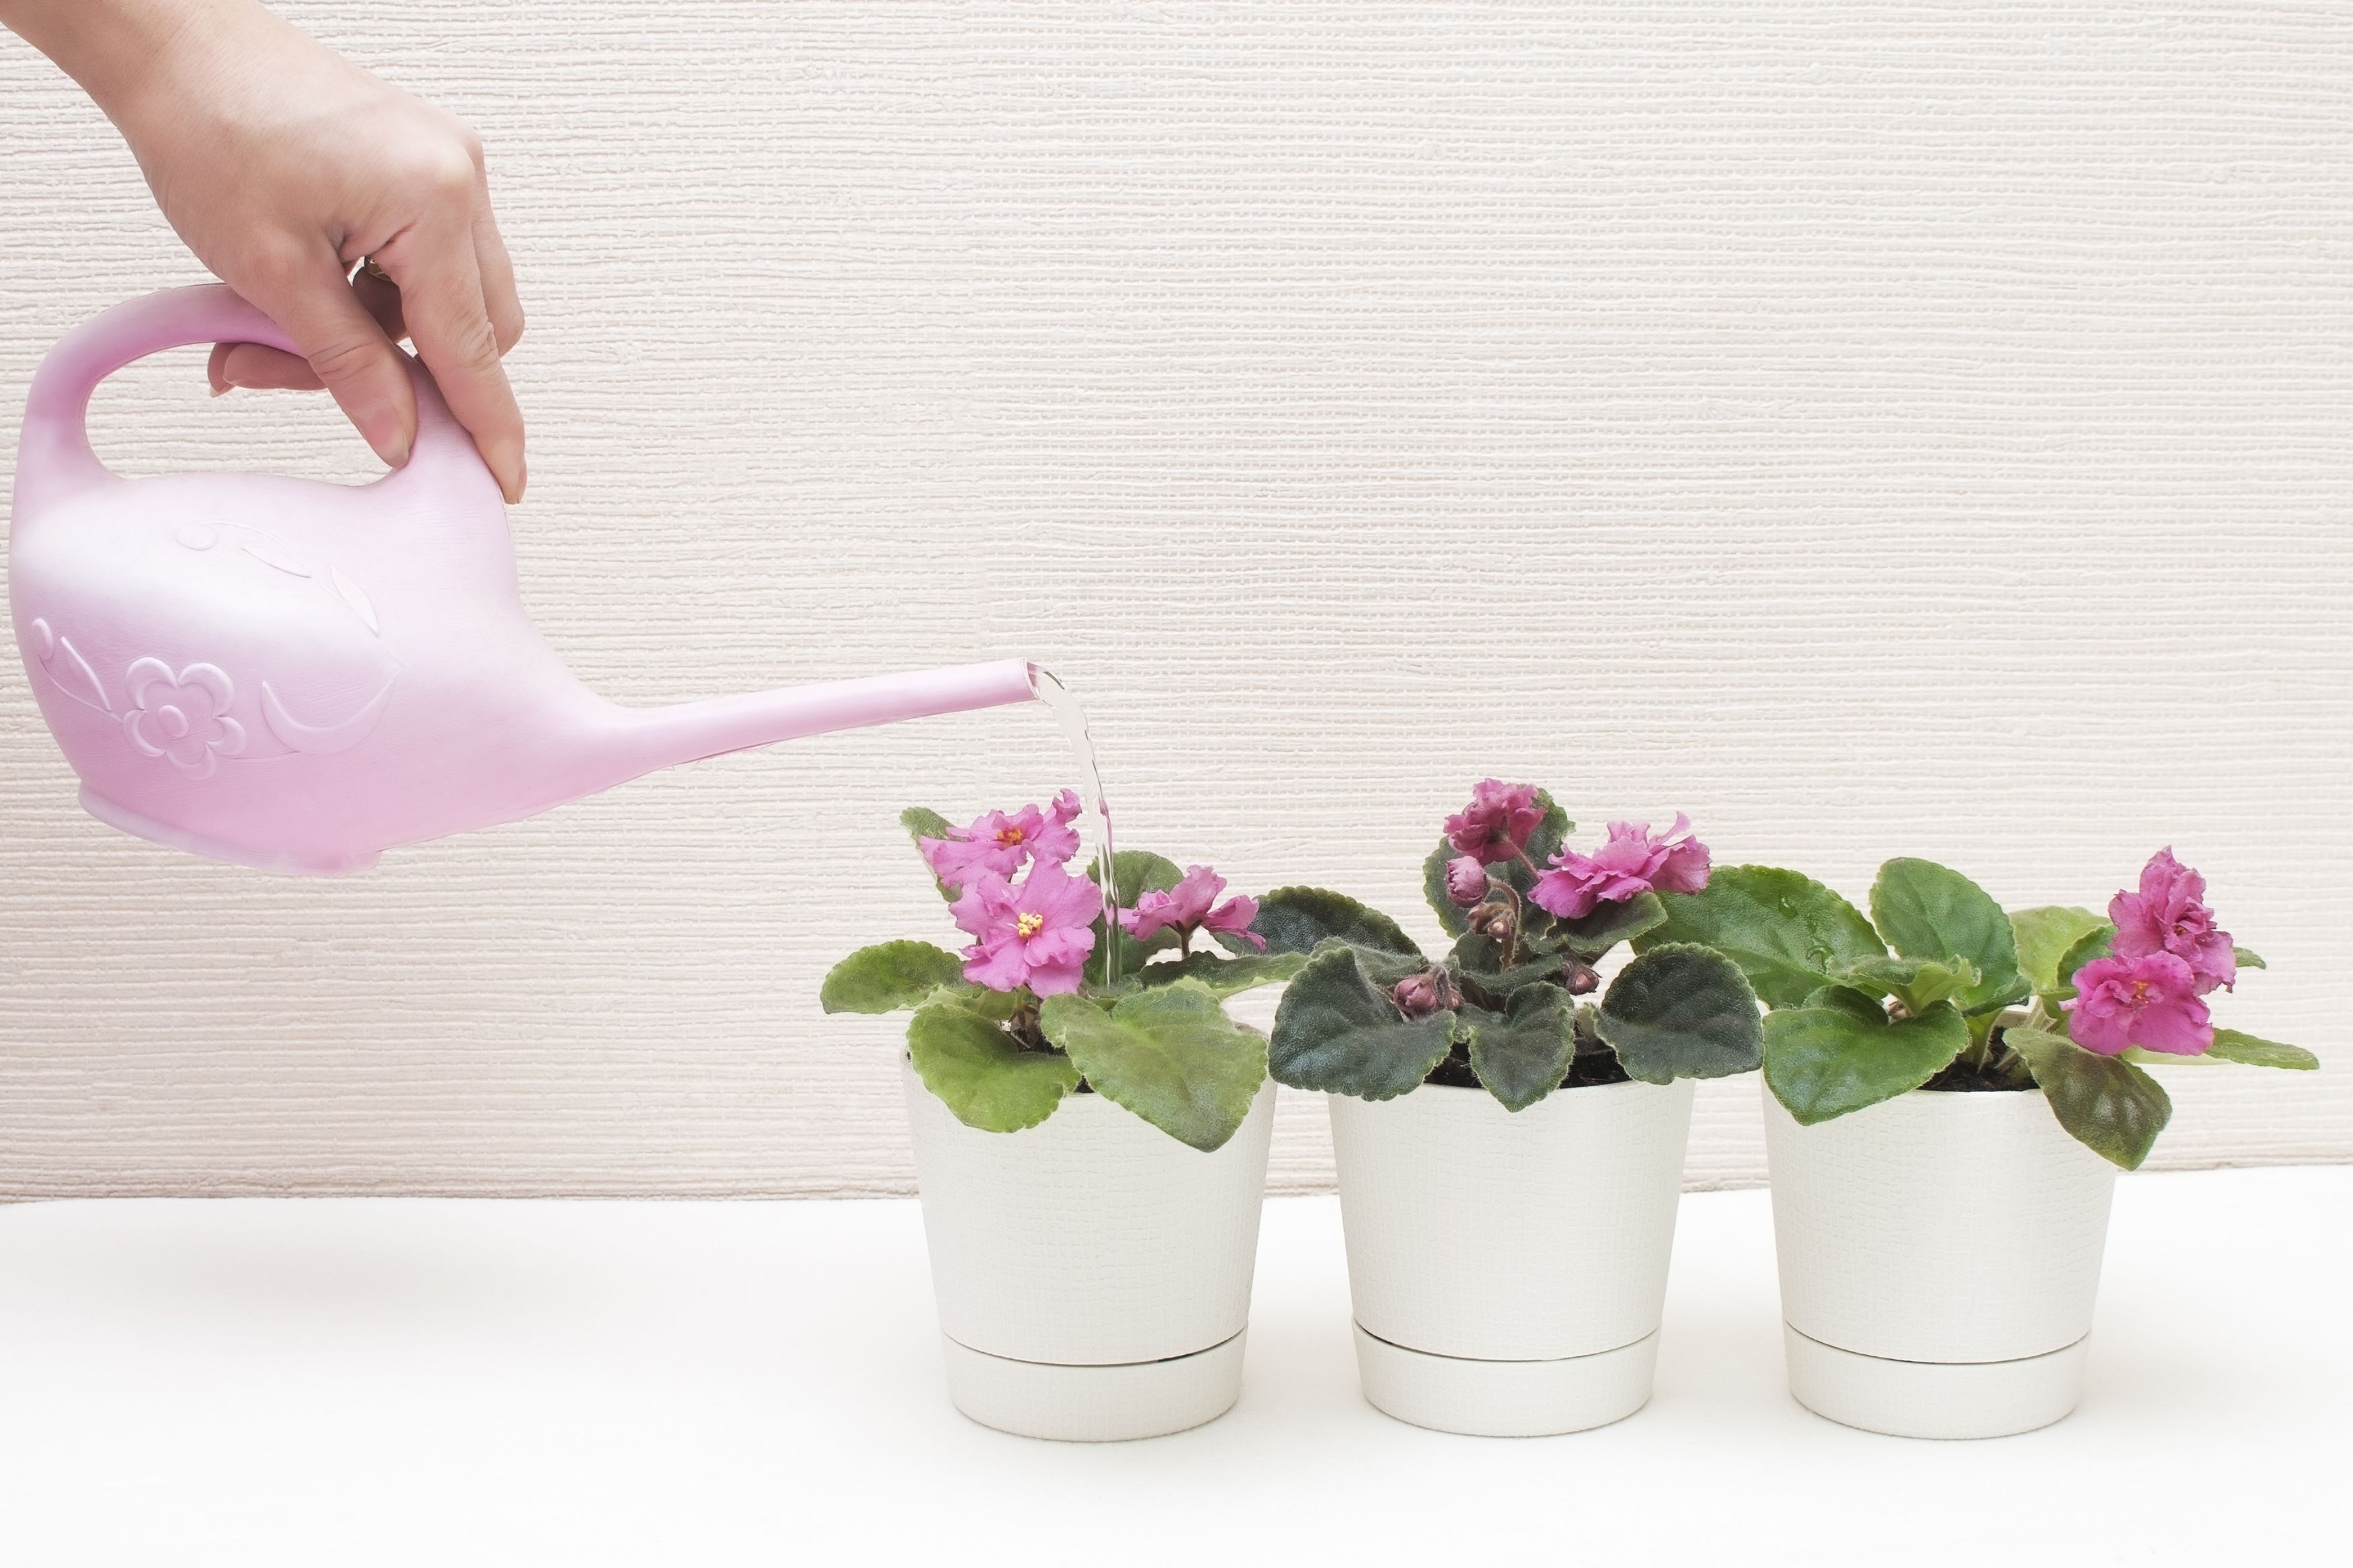 Hand holding watering can and watering three African violet plants